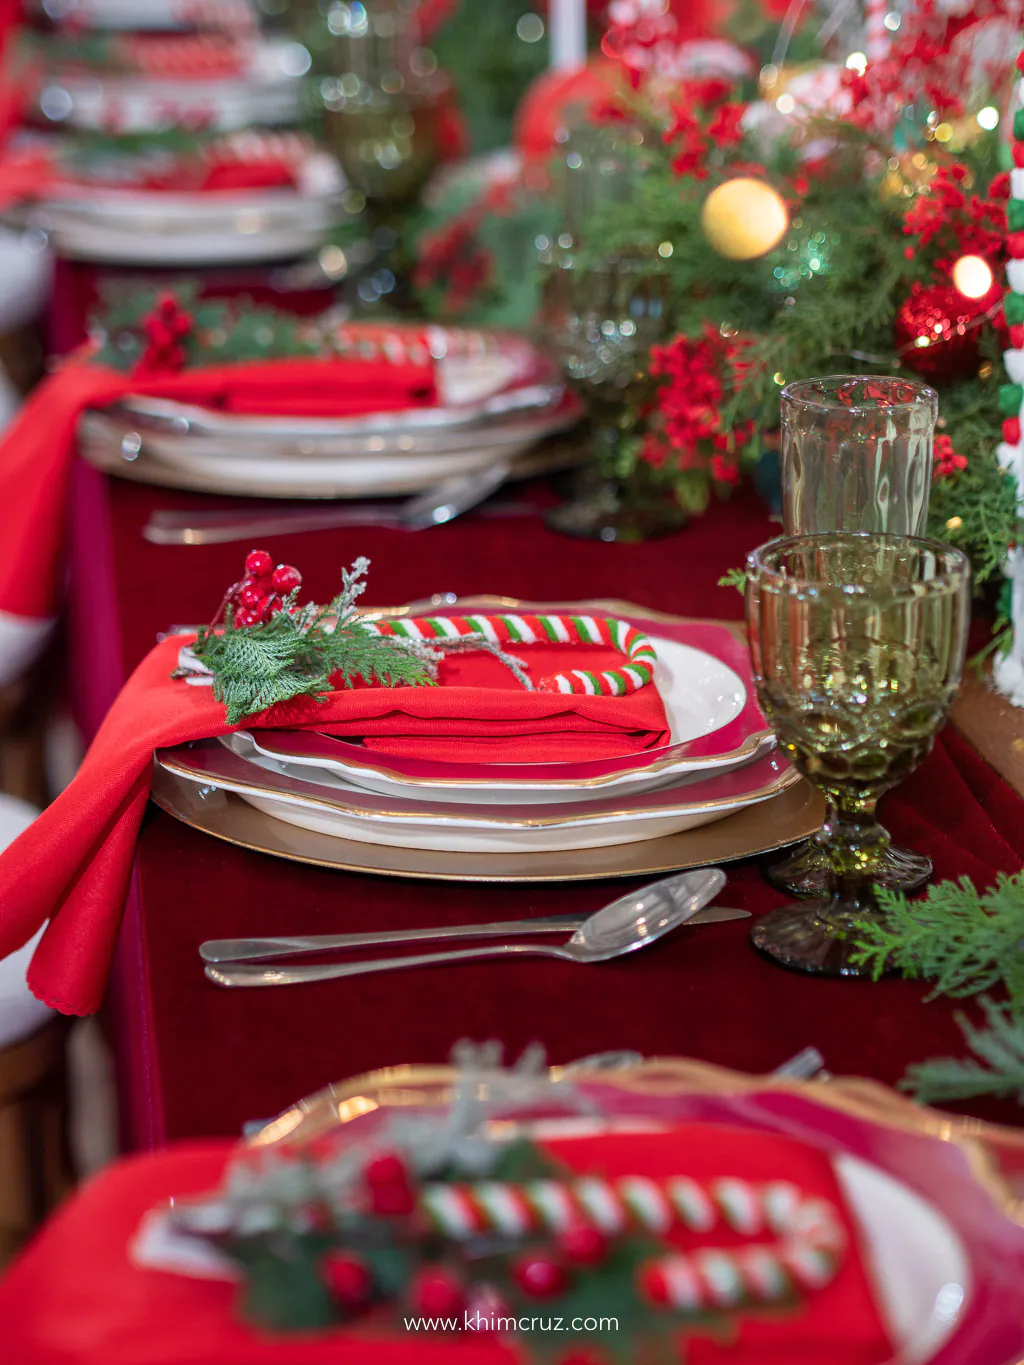 Christmas themed table setup details candy cane